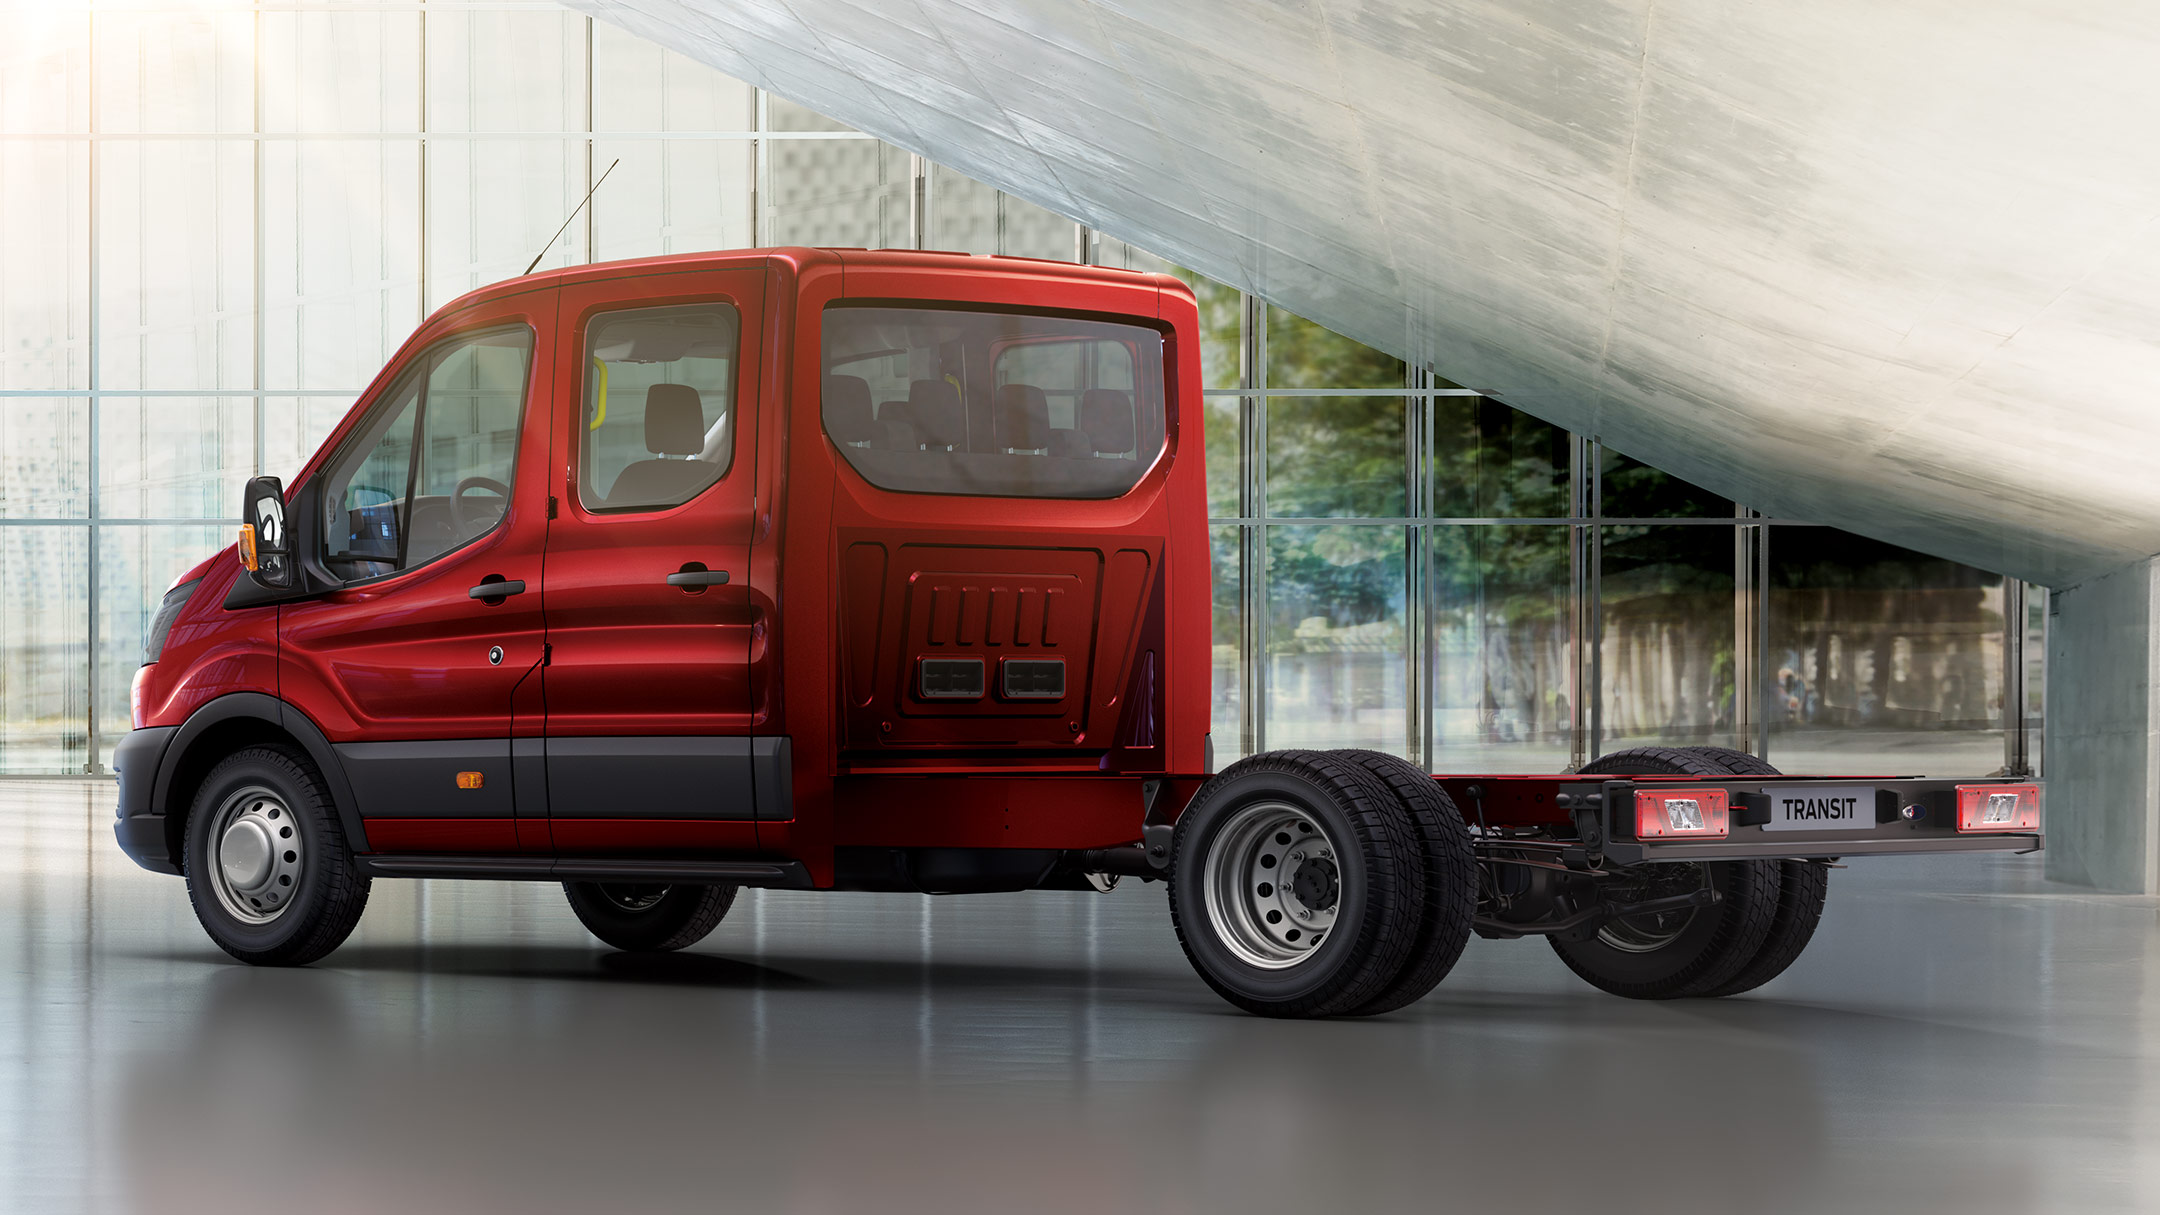 Transit Chassis Cab rear view